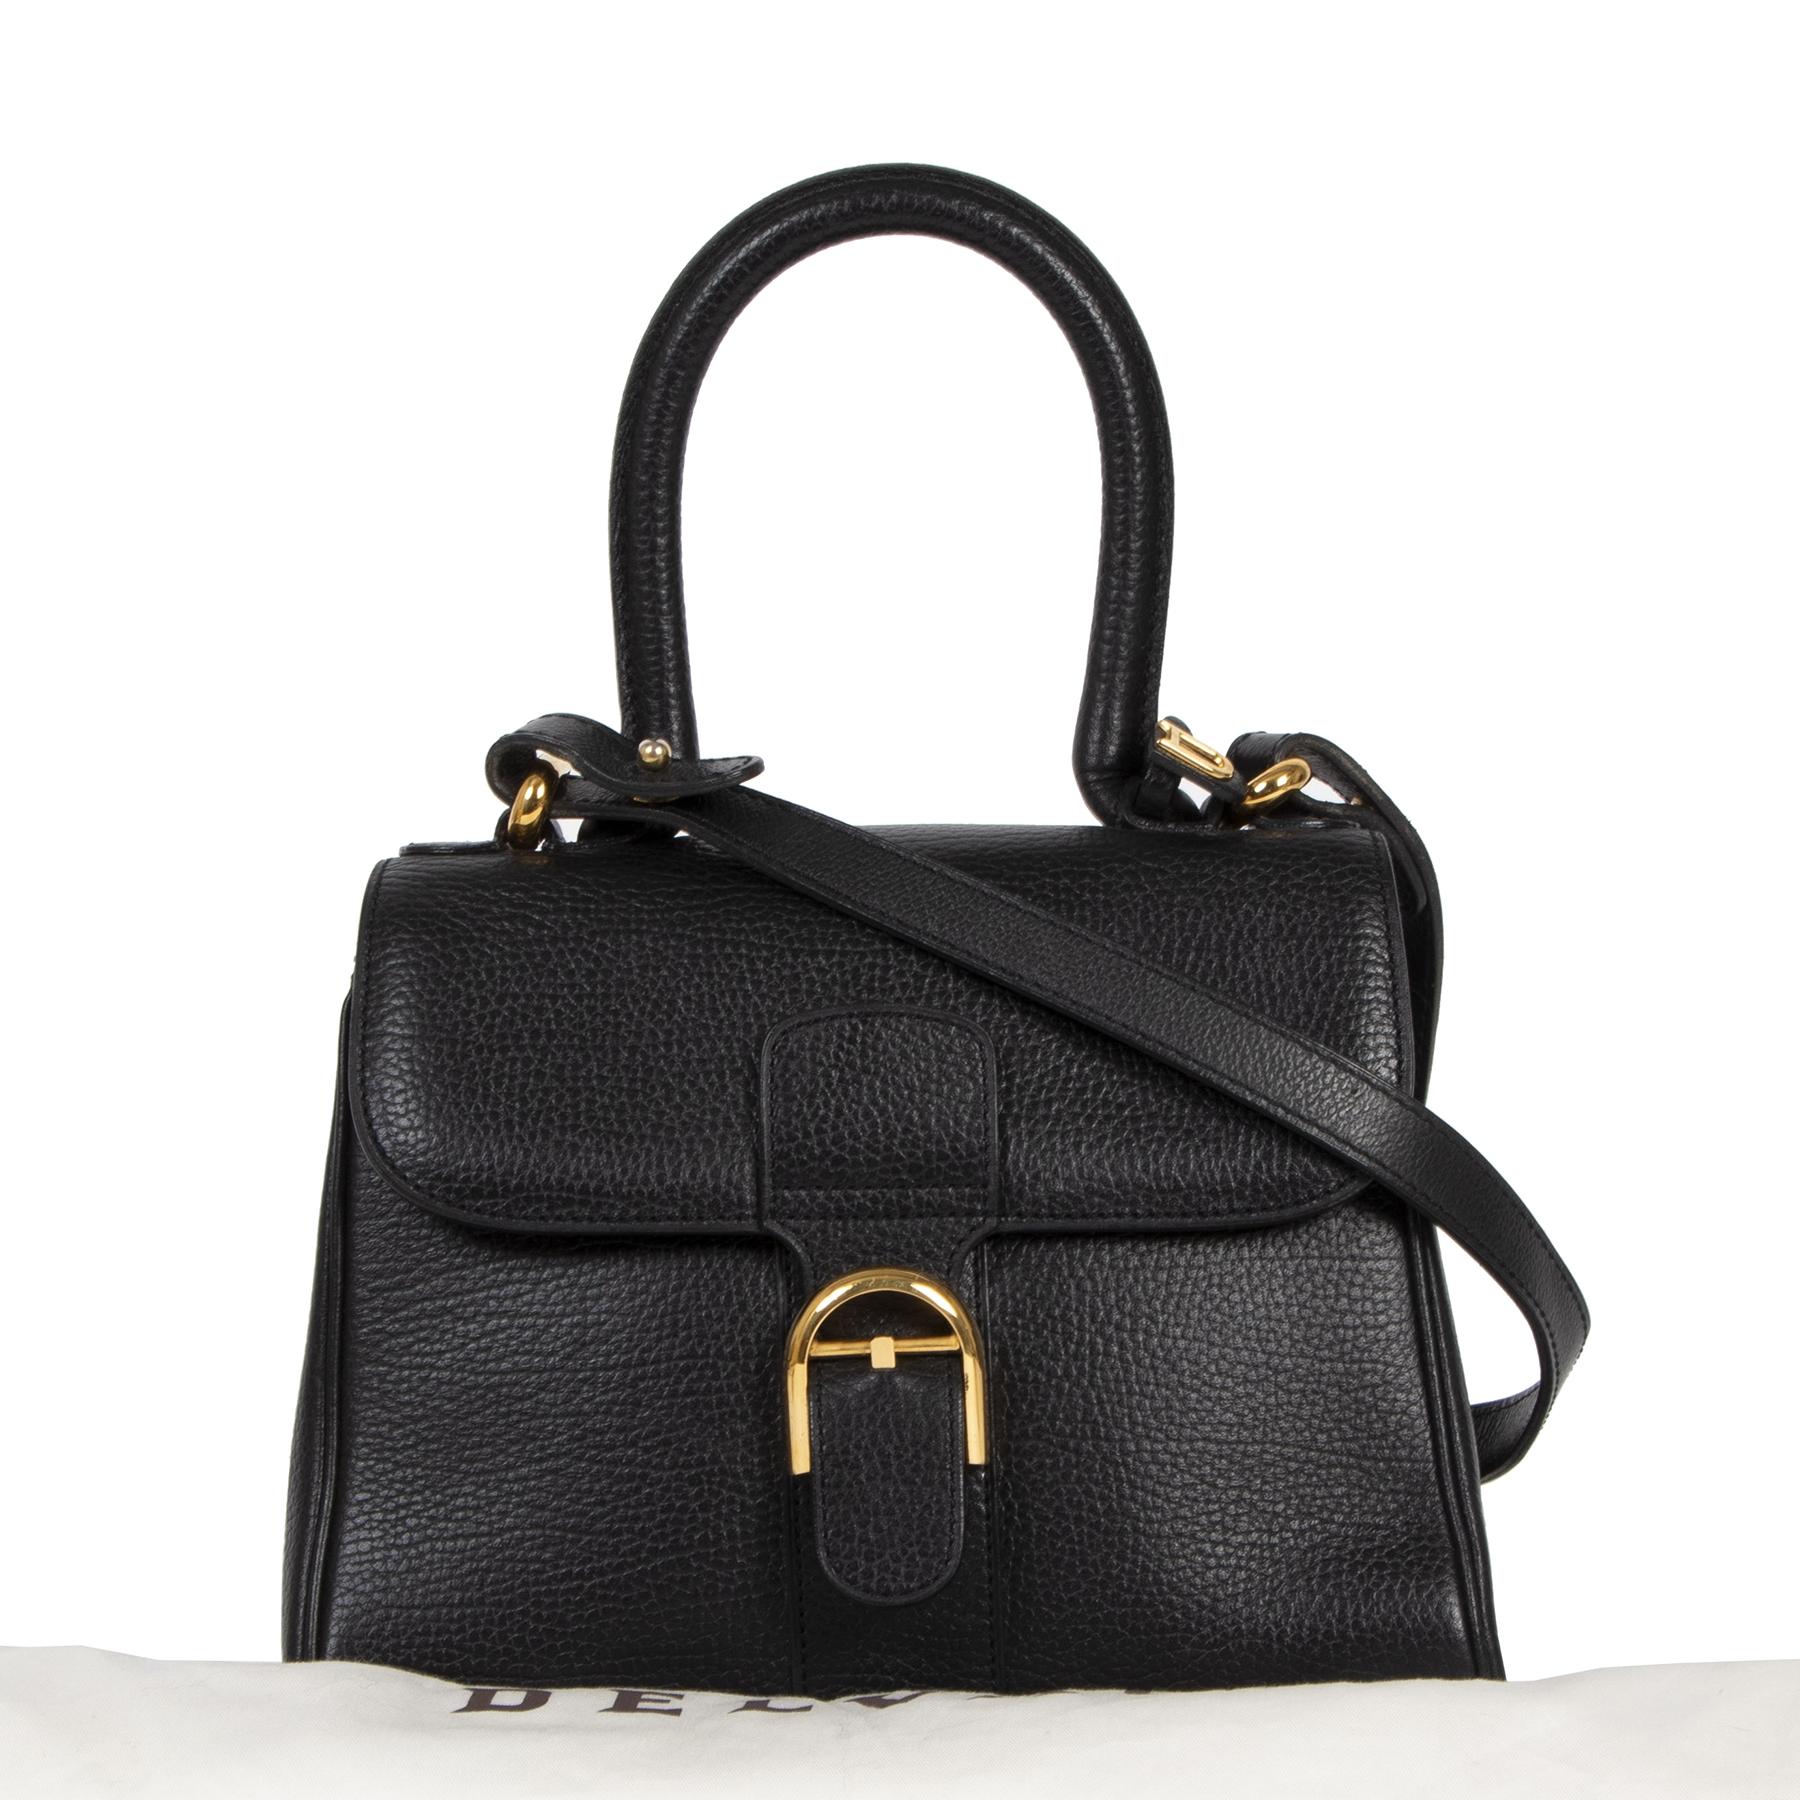 Very good condition

Delvaux Black Mini Brillant Bag

This bag is a true Belgian icon that will stay in style forever, the Delvaux Brillant. With the mini bag trend making a huge comeback, this Delvaux Brillant mini bag is the perfect piece to join